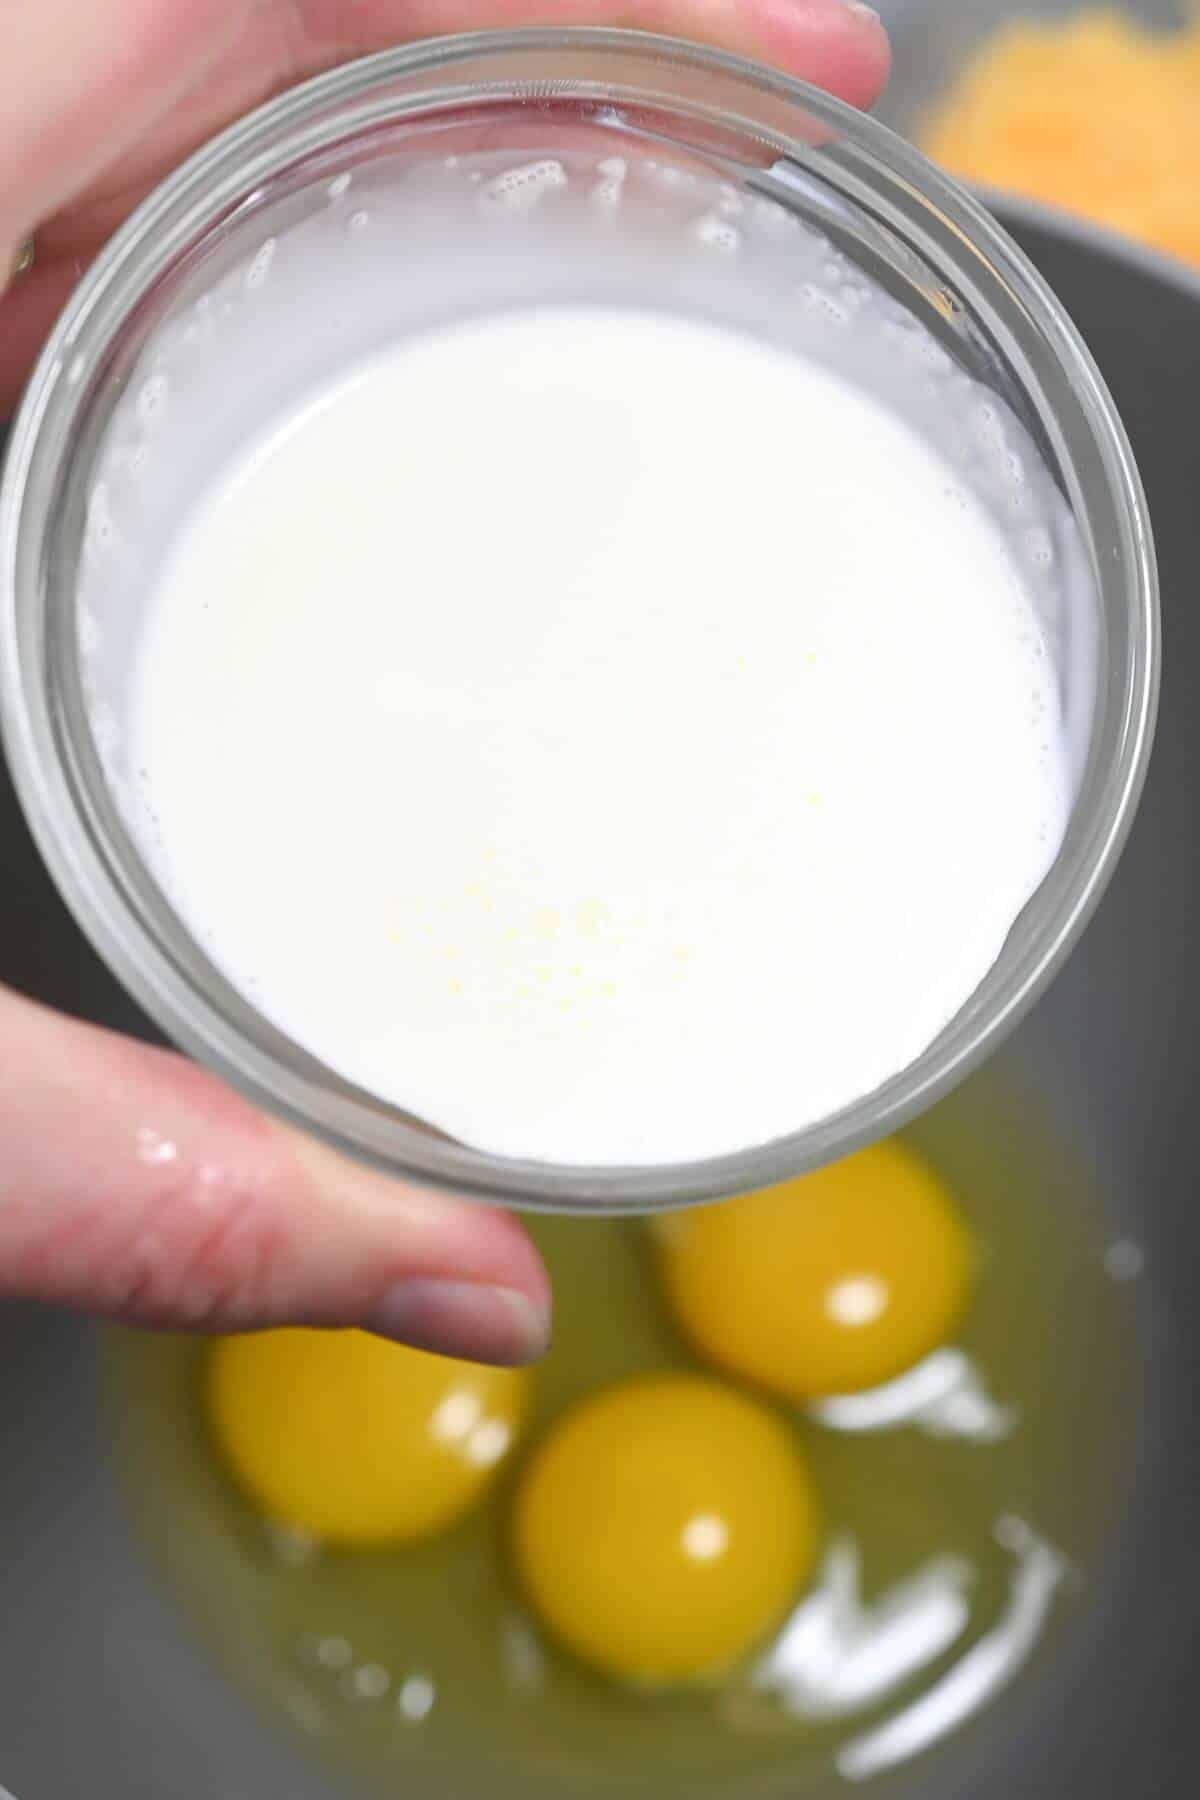 A person holding a glass of cream above a bowl containing eggs.